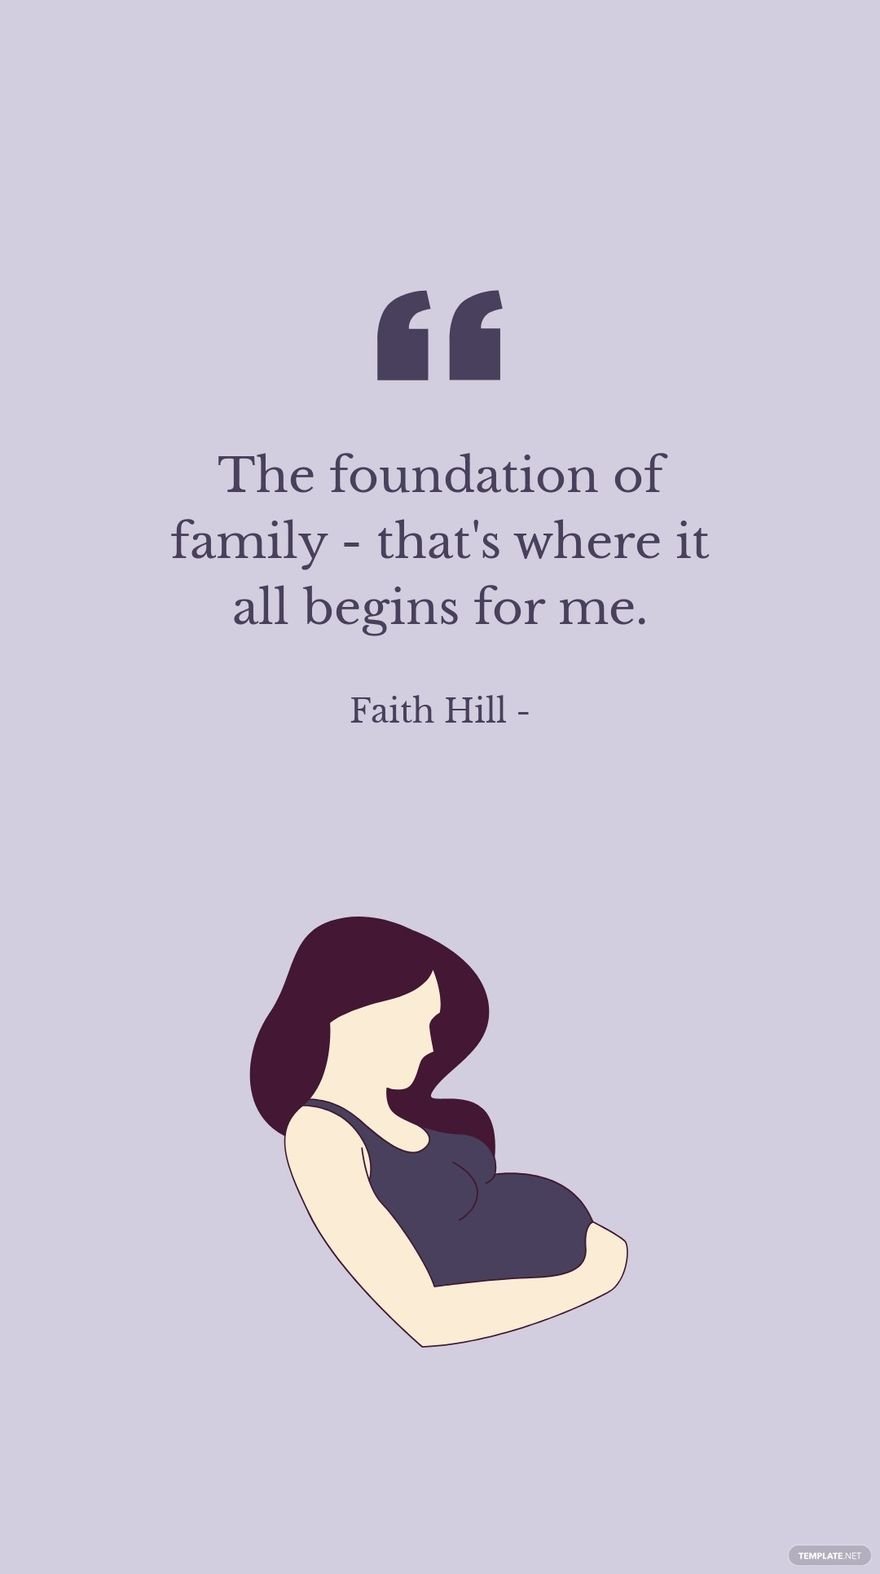 Faith Hill - The foundation of family - that's where it all begins for me.